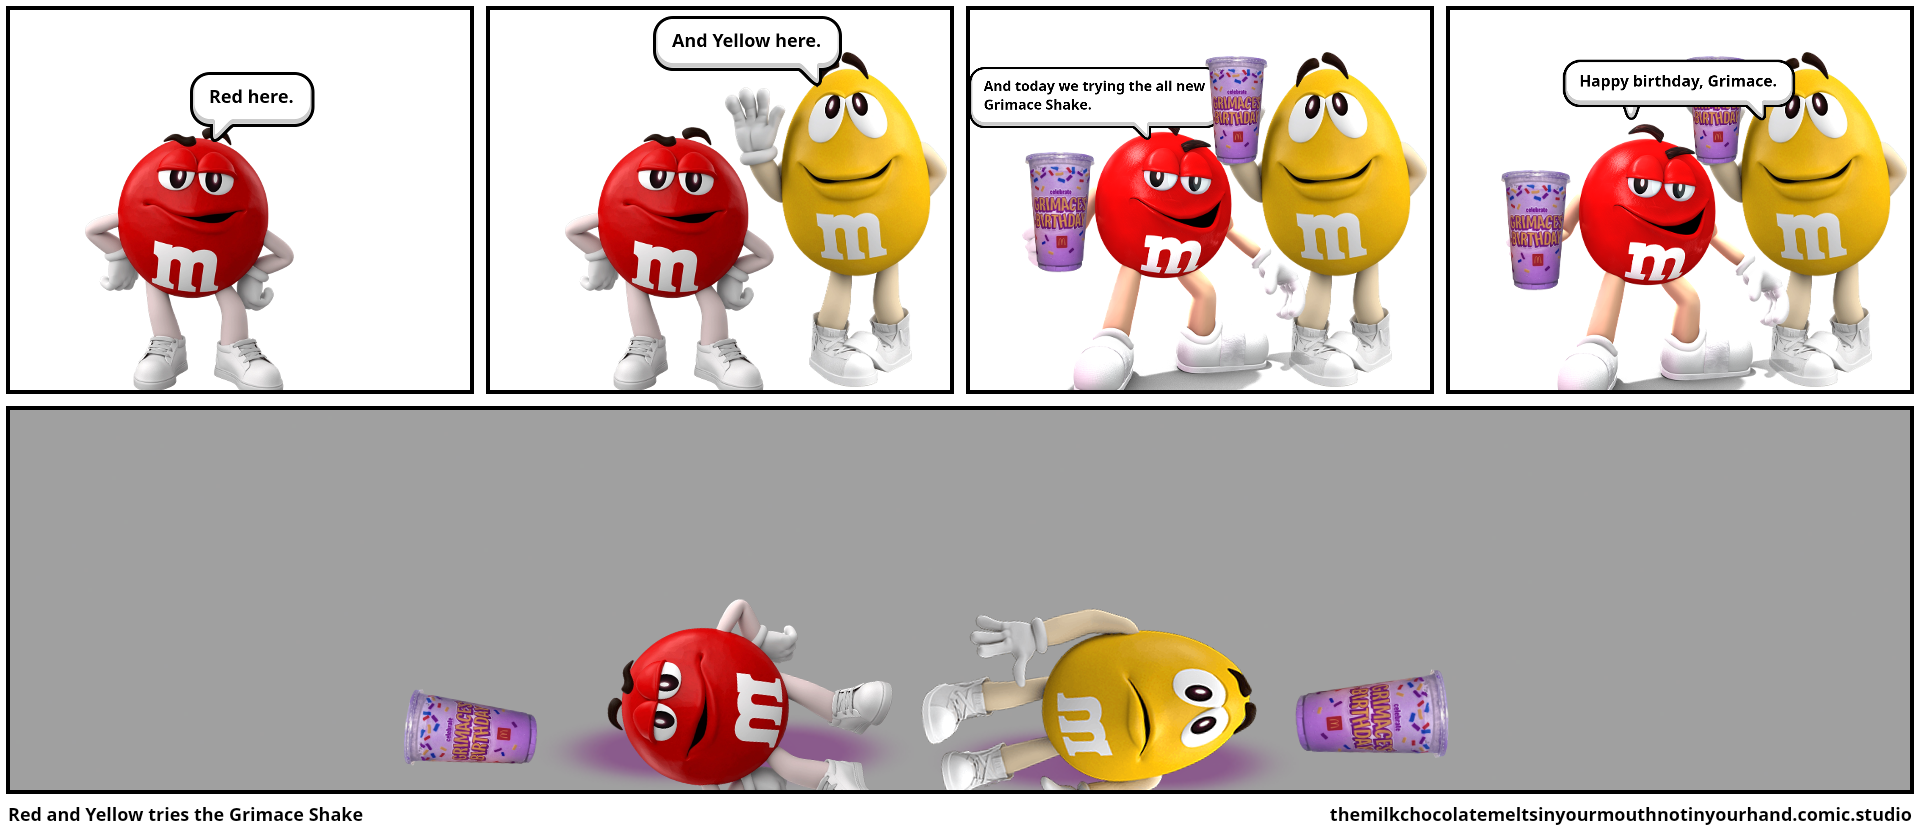 Red and Yellow tries the Grimace Shake